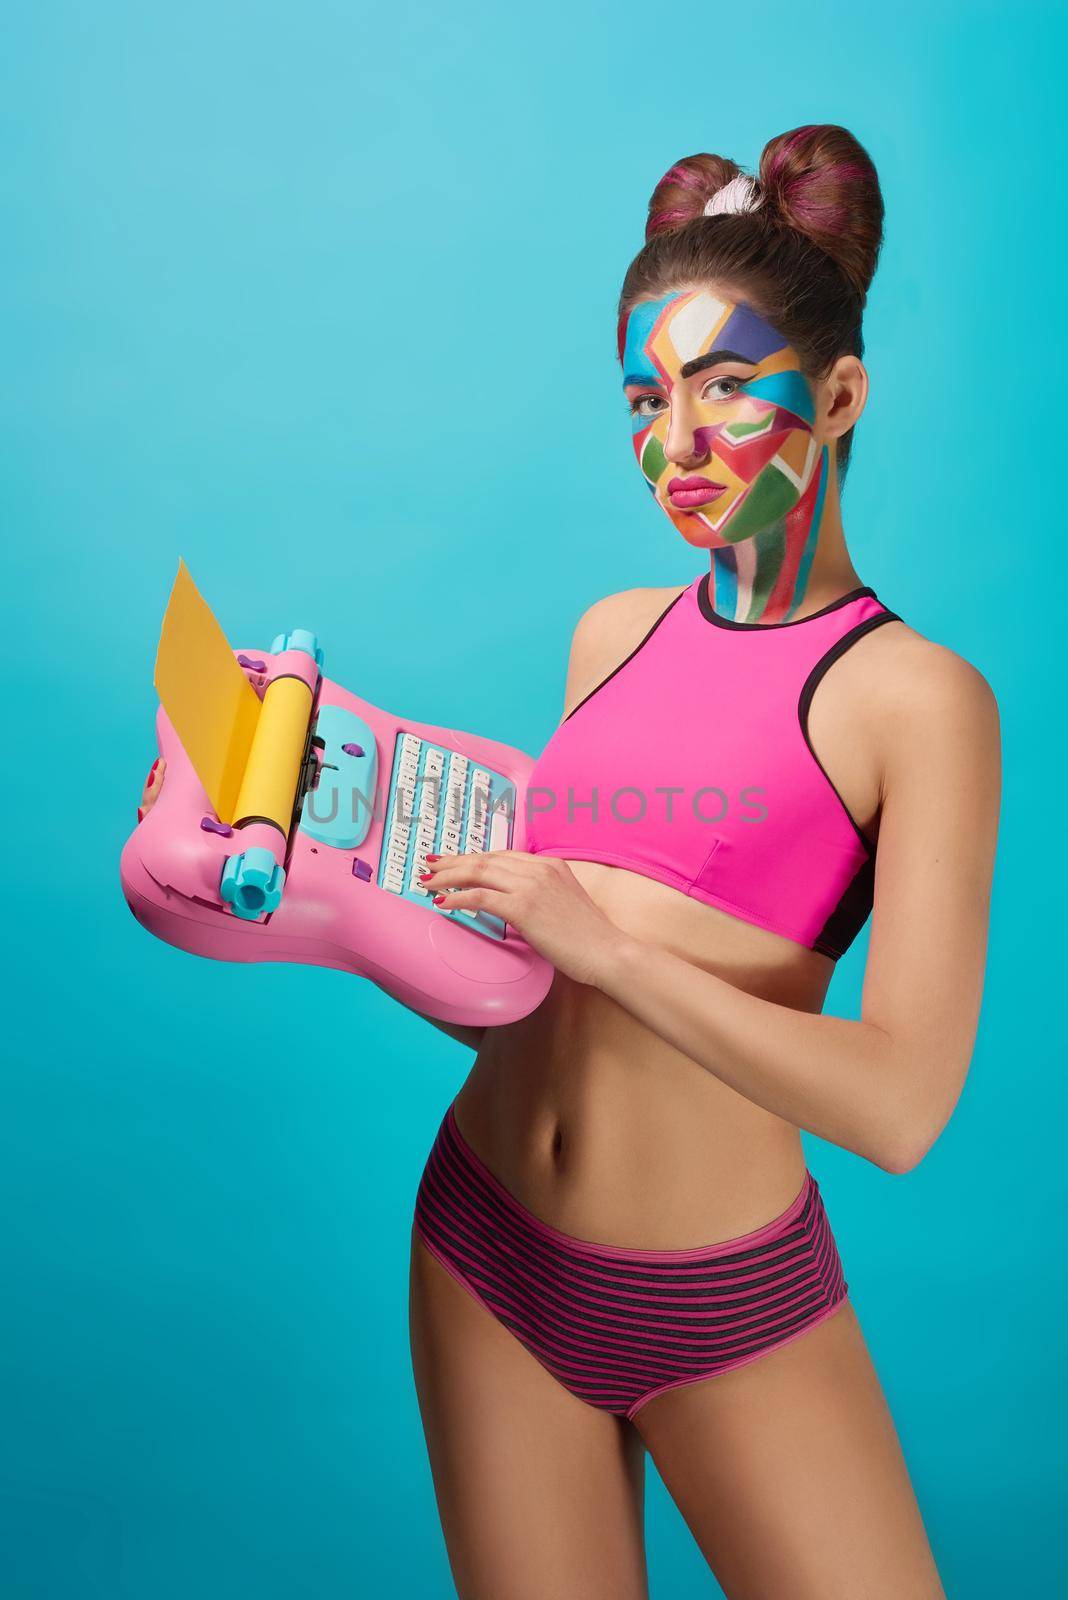 Stylish girl with slender figure looking at camera, holding pink toy typewriter, standing. Beautiful, cool model has pop art colourful make up on face, wearing pink sportive top.